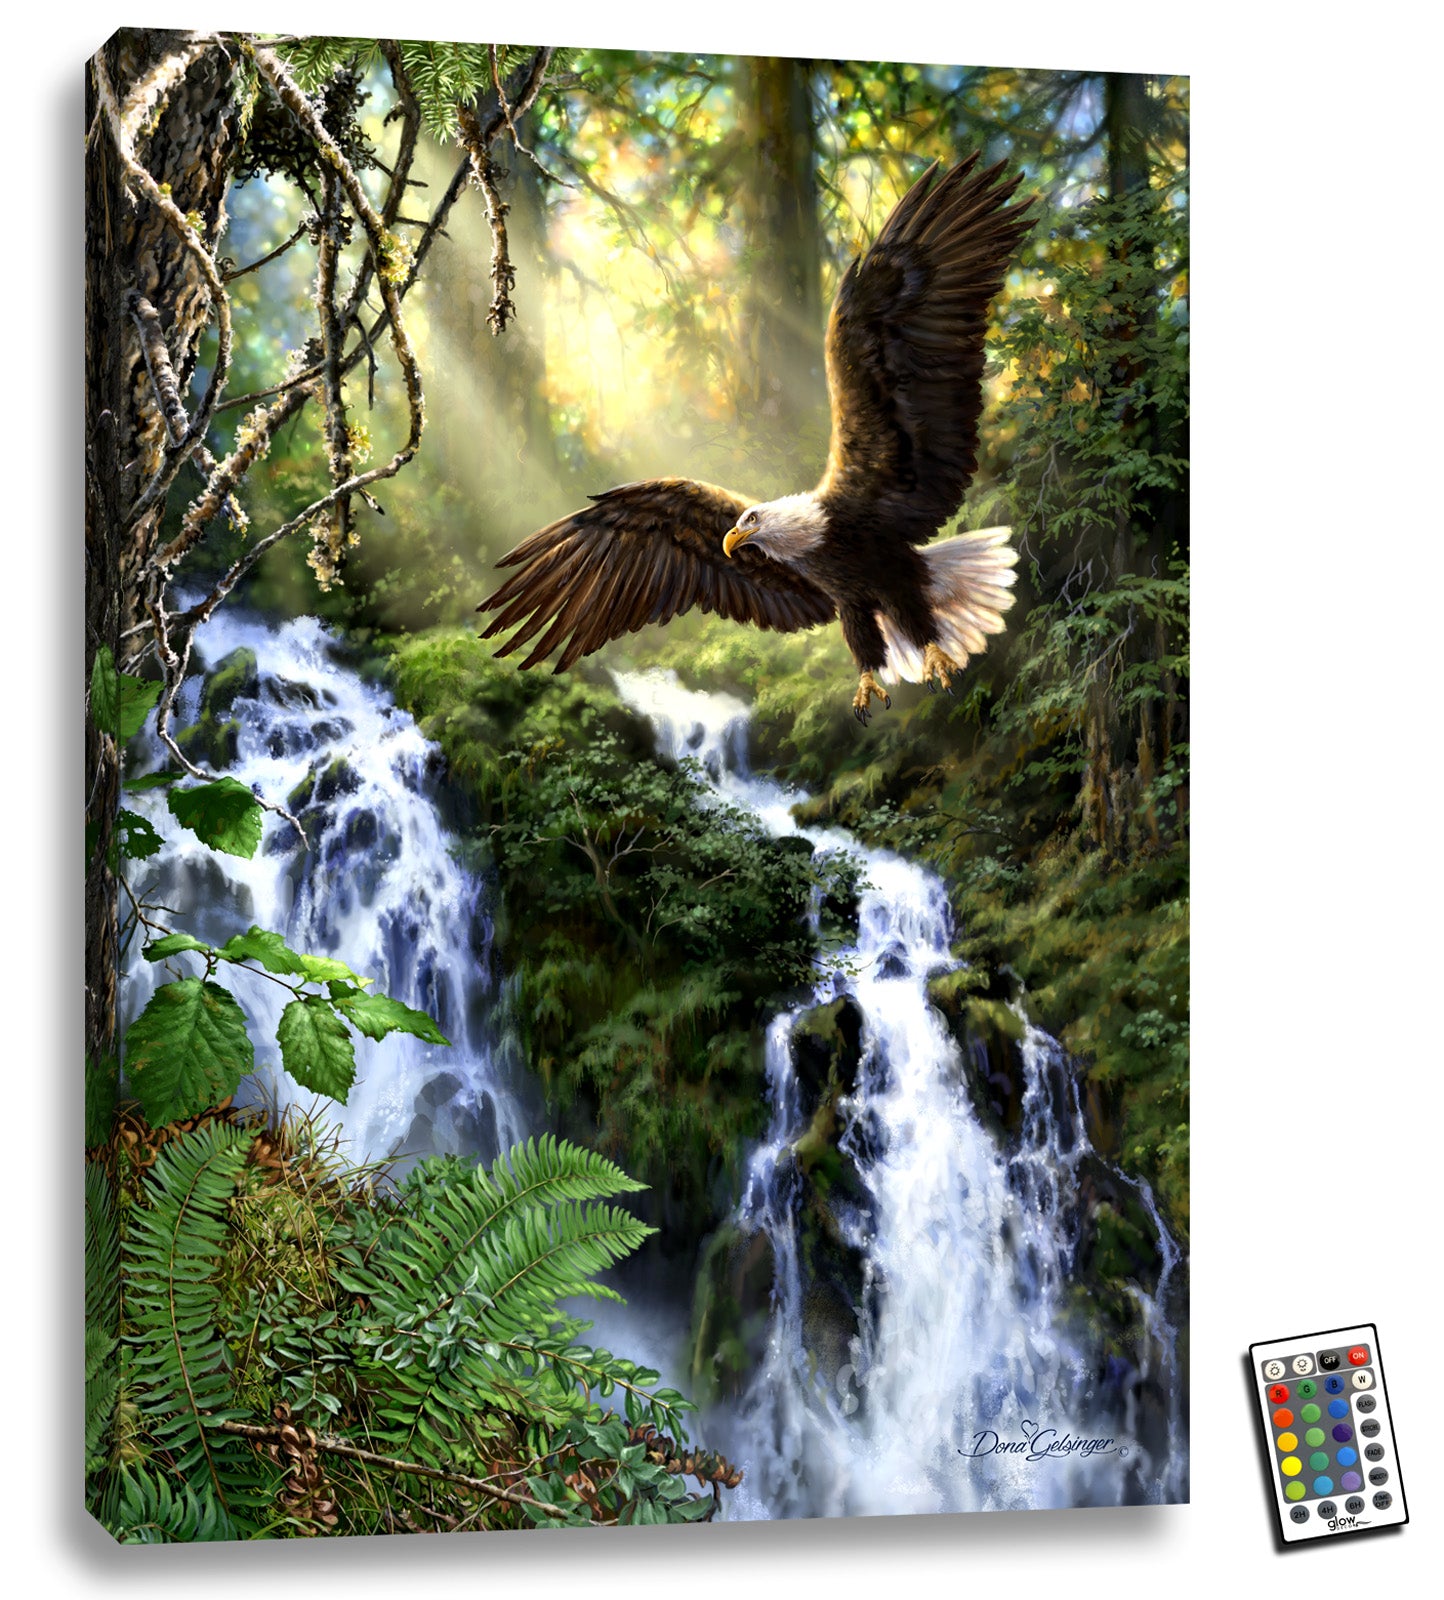 This stunning piece features a majestic bald eagle soaring through the sky in front of a tranquil stream, surrounded by the serene beauty of a lush forest.  The intricate detailing of the eagle's feathers and the stunning light piercing through the forest make this piece truly exceptional.